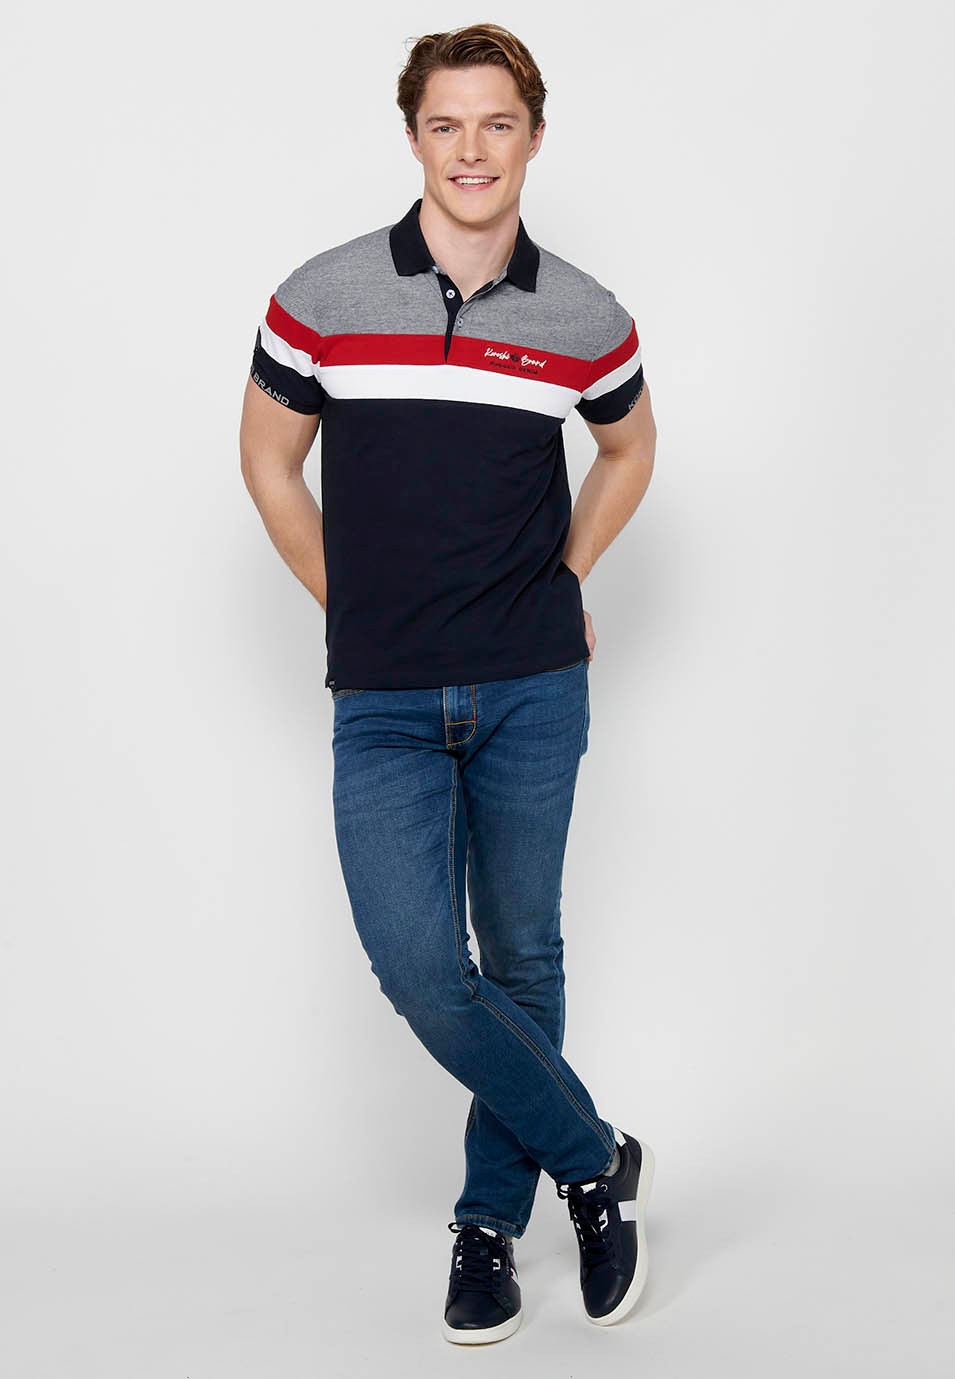 100% cotton short sleeve polo shirt, striped detail on the chest, navy color for men 2